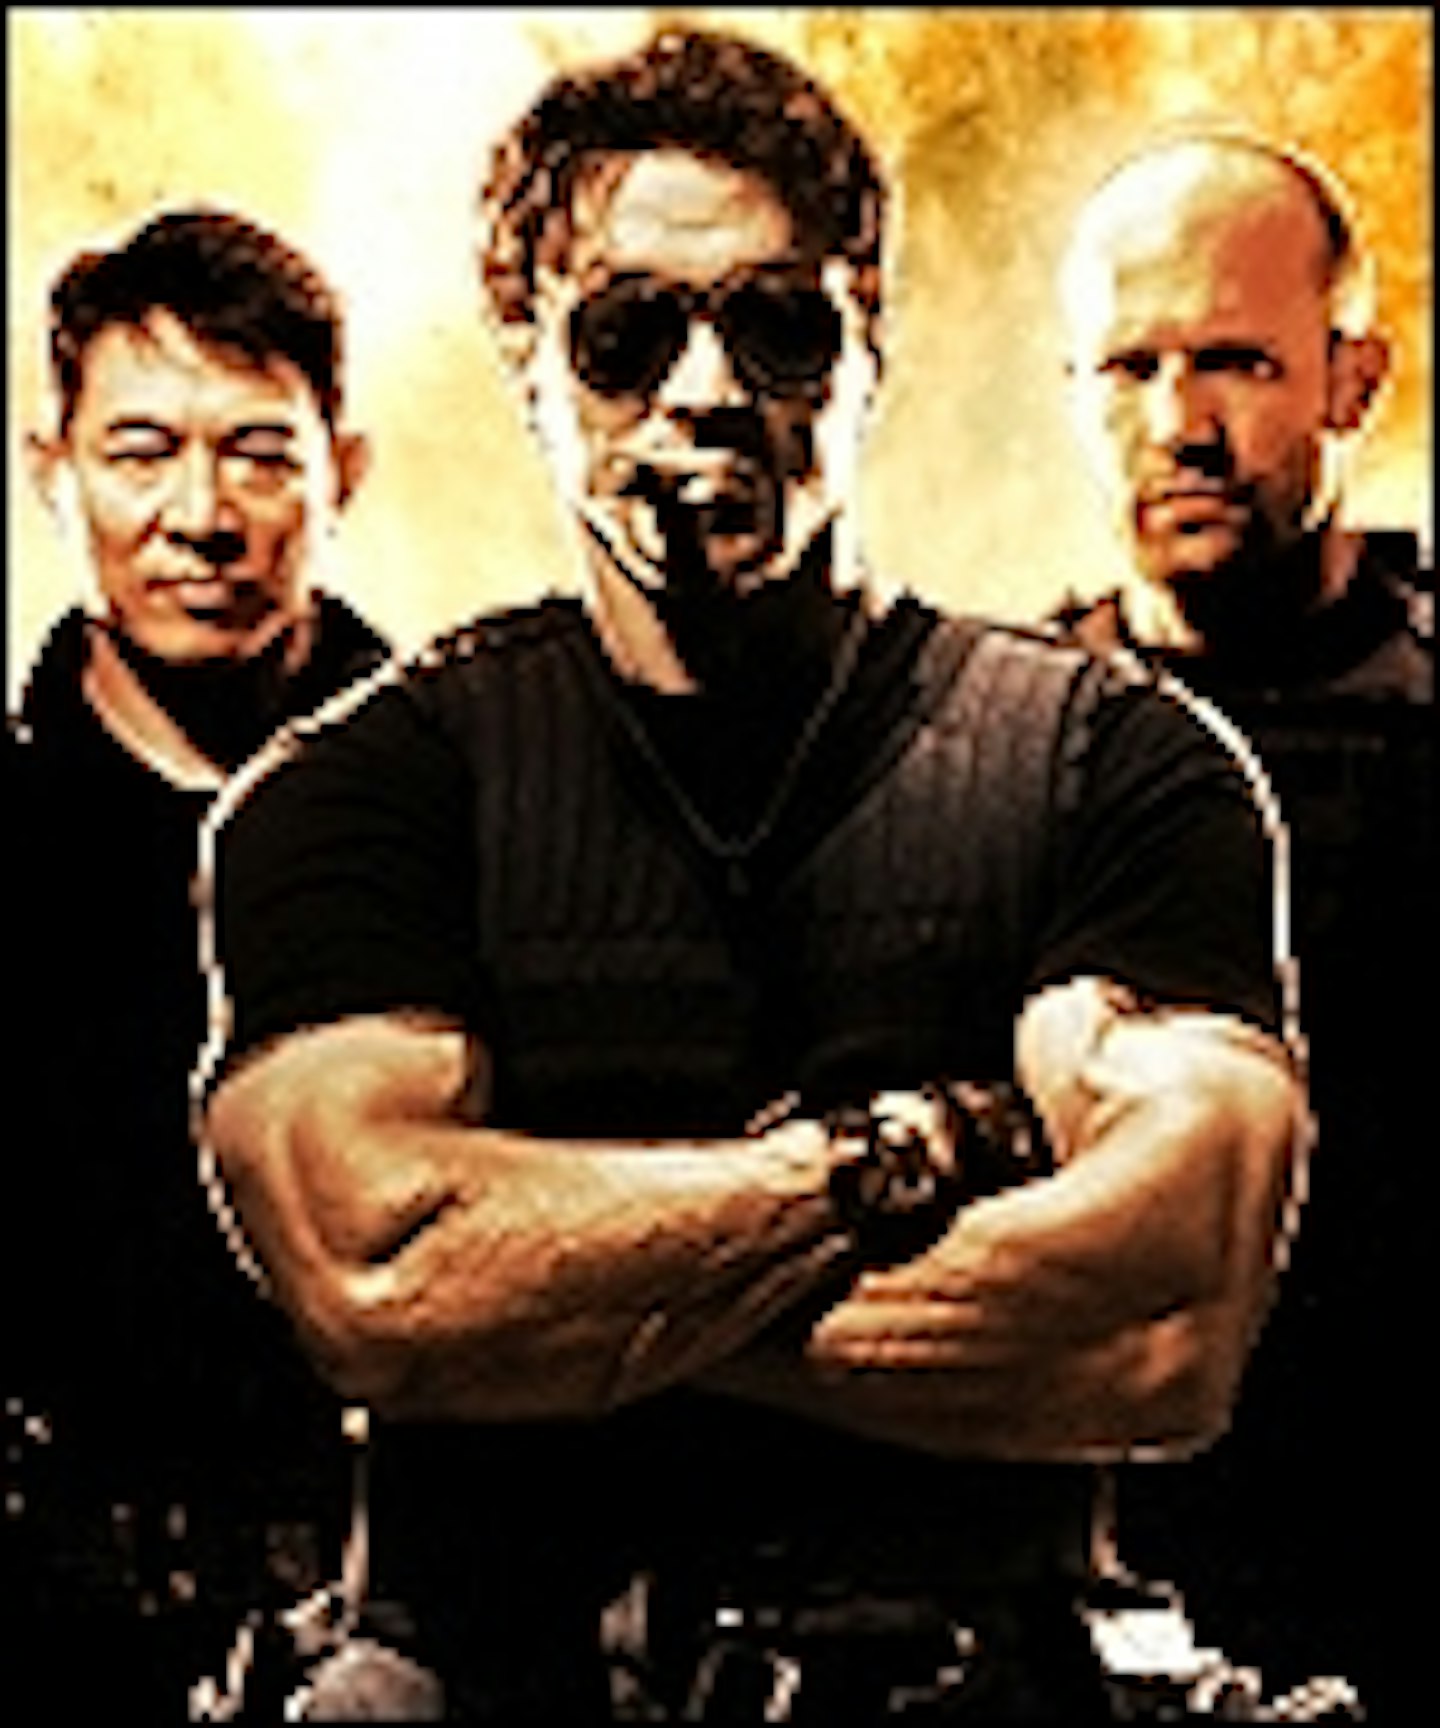 Sly Tweets Expendables 2 Possibilities